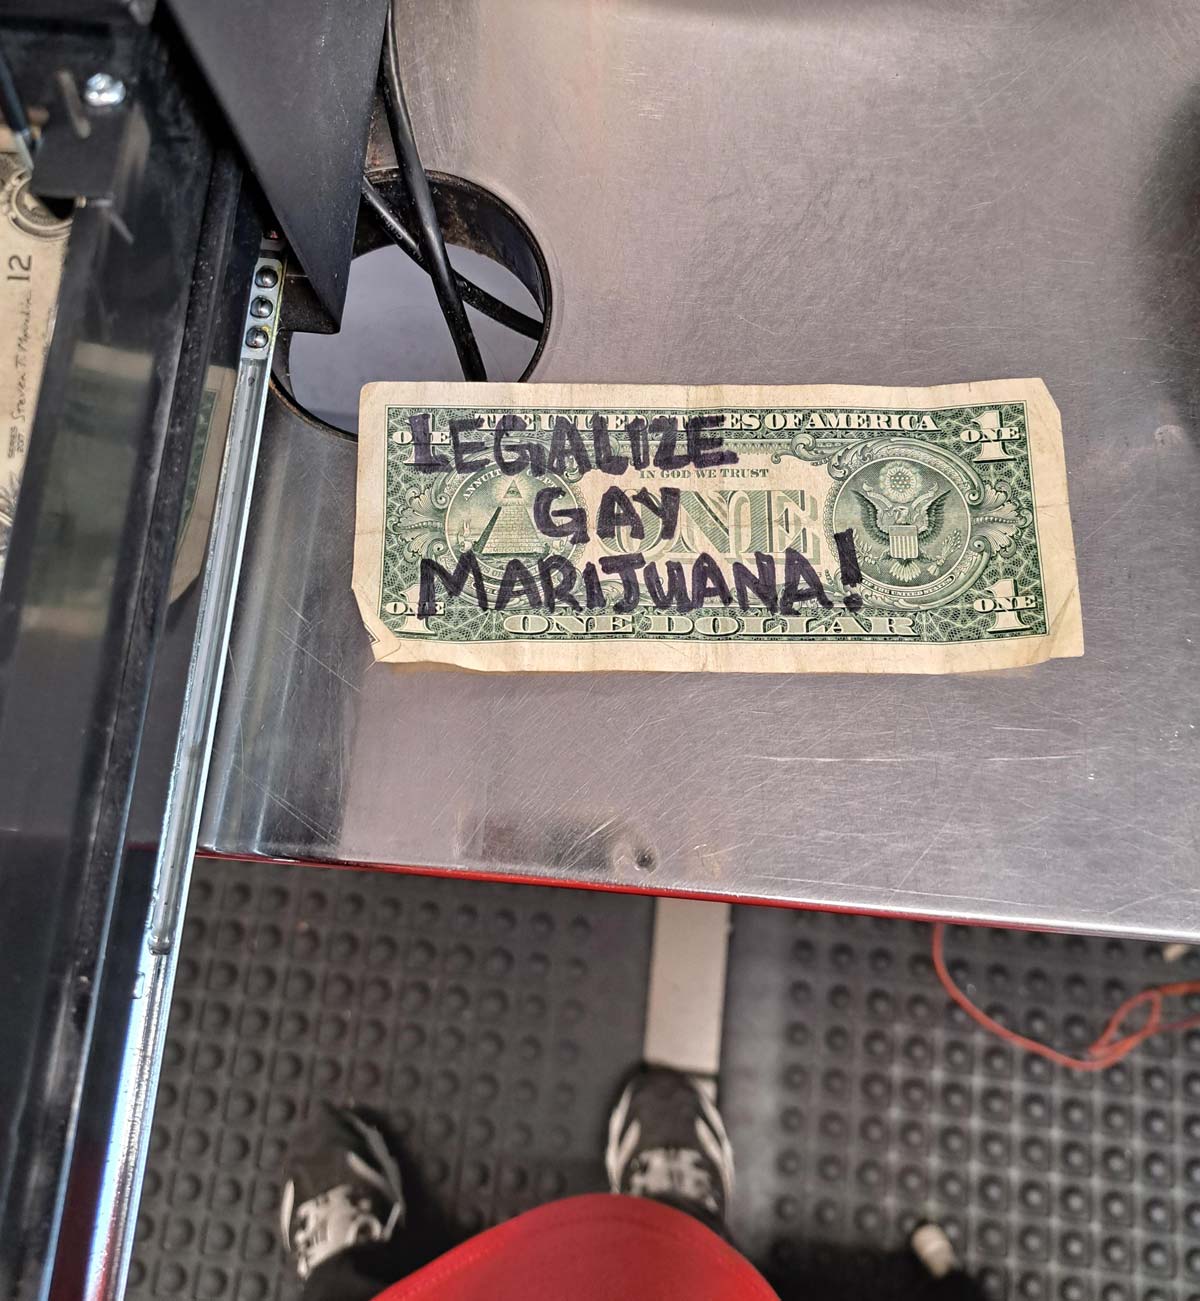 I'm a cashier and someone just paid with this